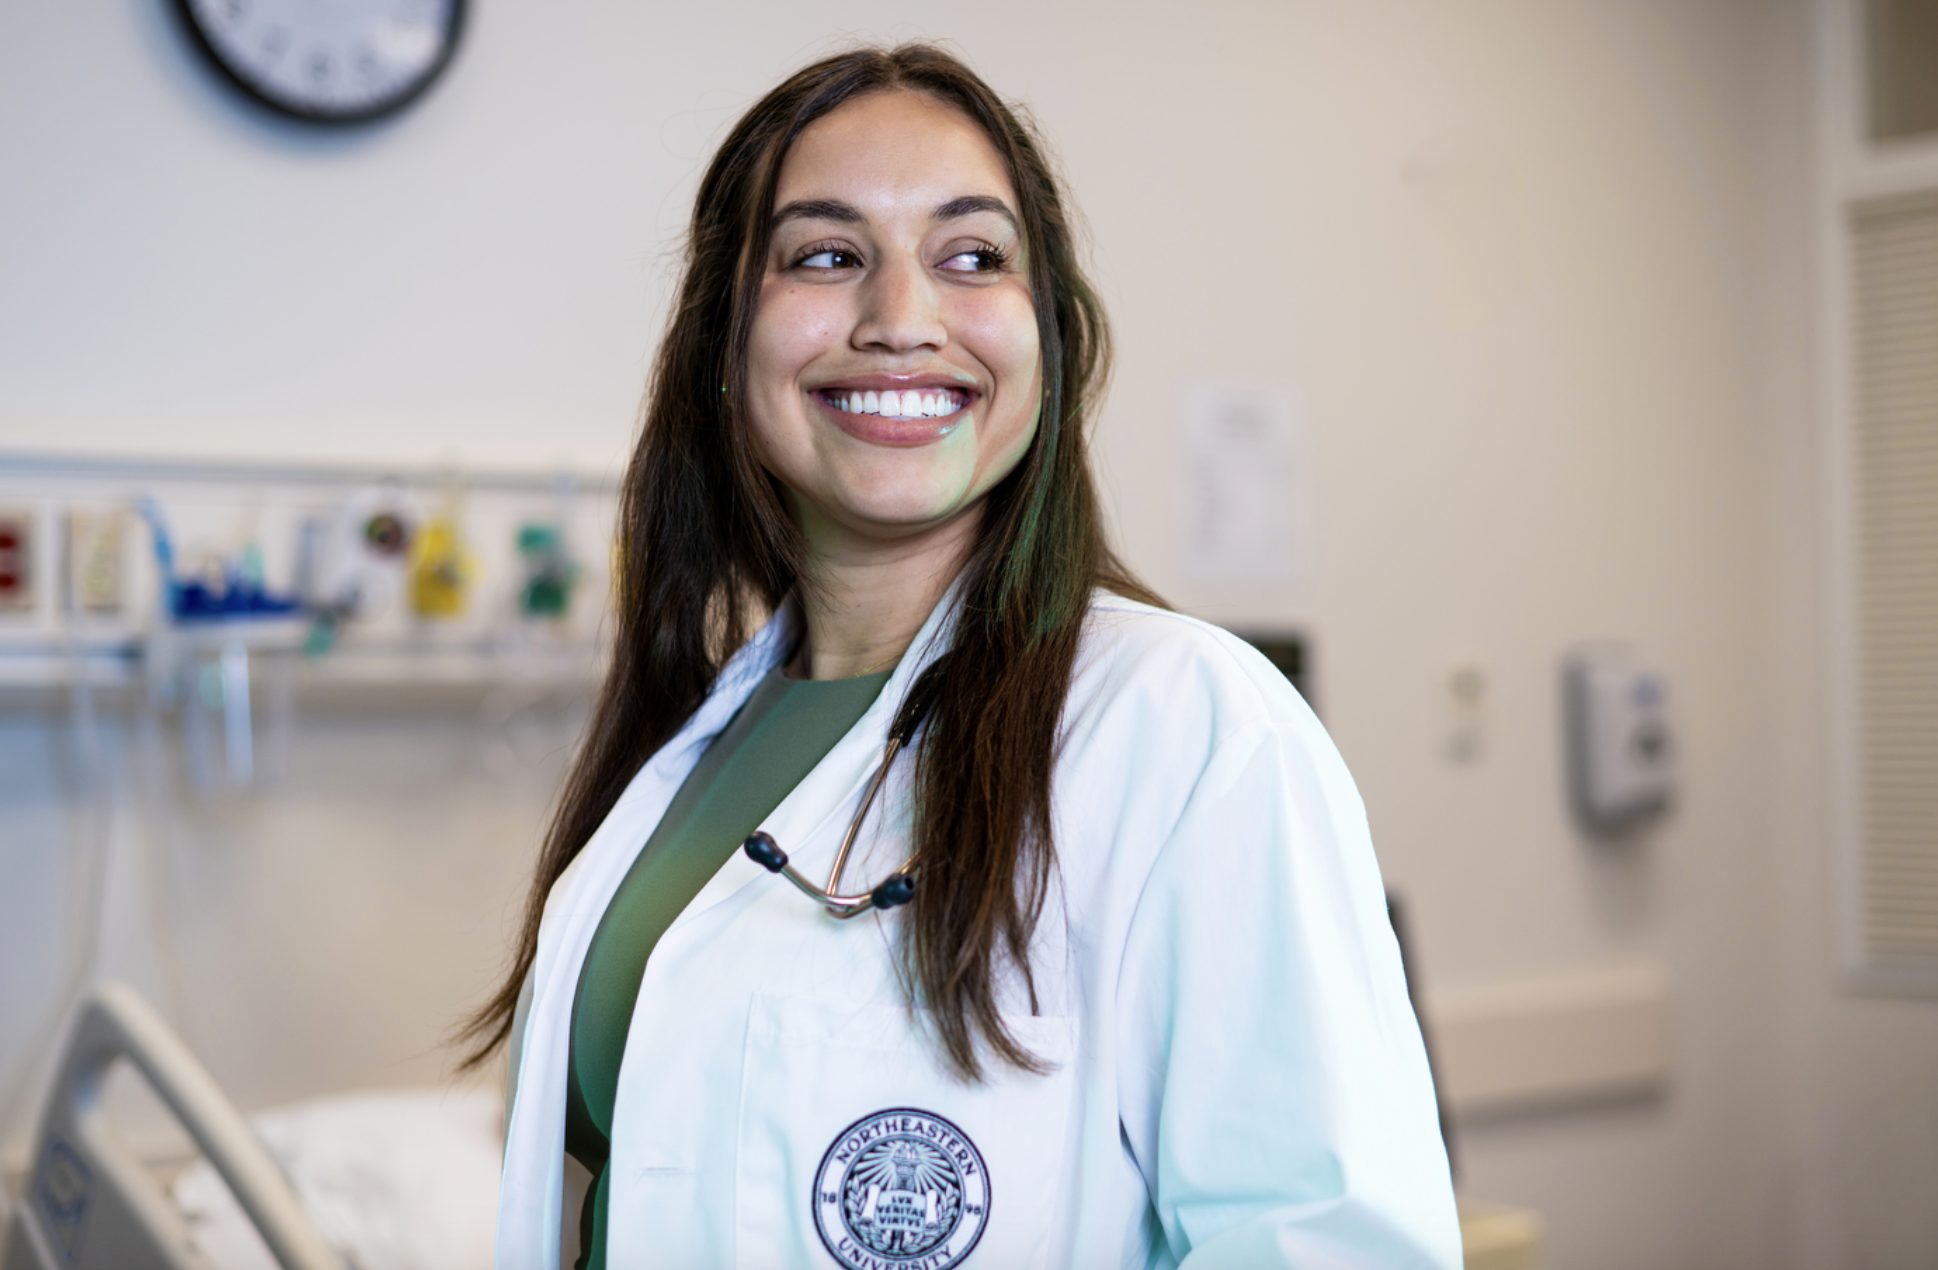 Northeastern MLK Scholar Susana Kalish was inspired to become a physician’s assistant in order to treat patients holistically and with an eye toward both their physical and mental health. Photo by Alyssa Stone/Northeastern University